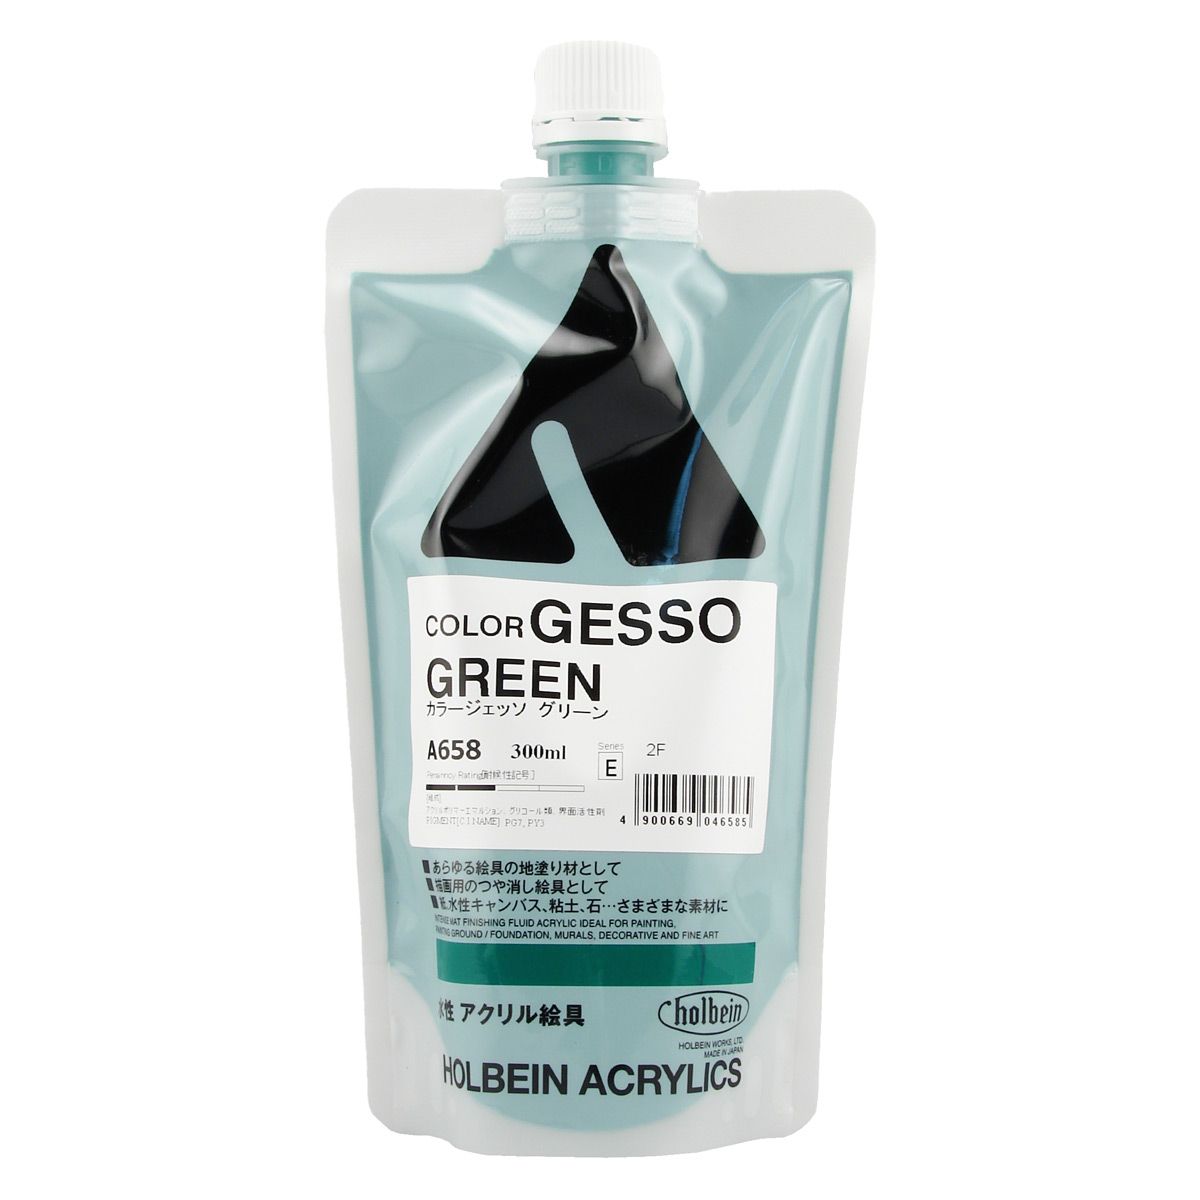 Holbein Acrylic Colored Gesso 300ml Green